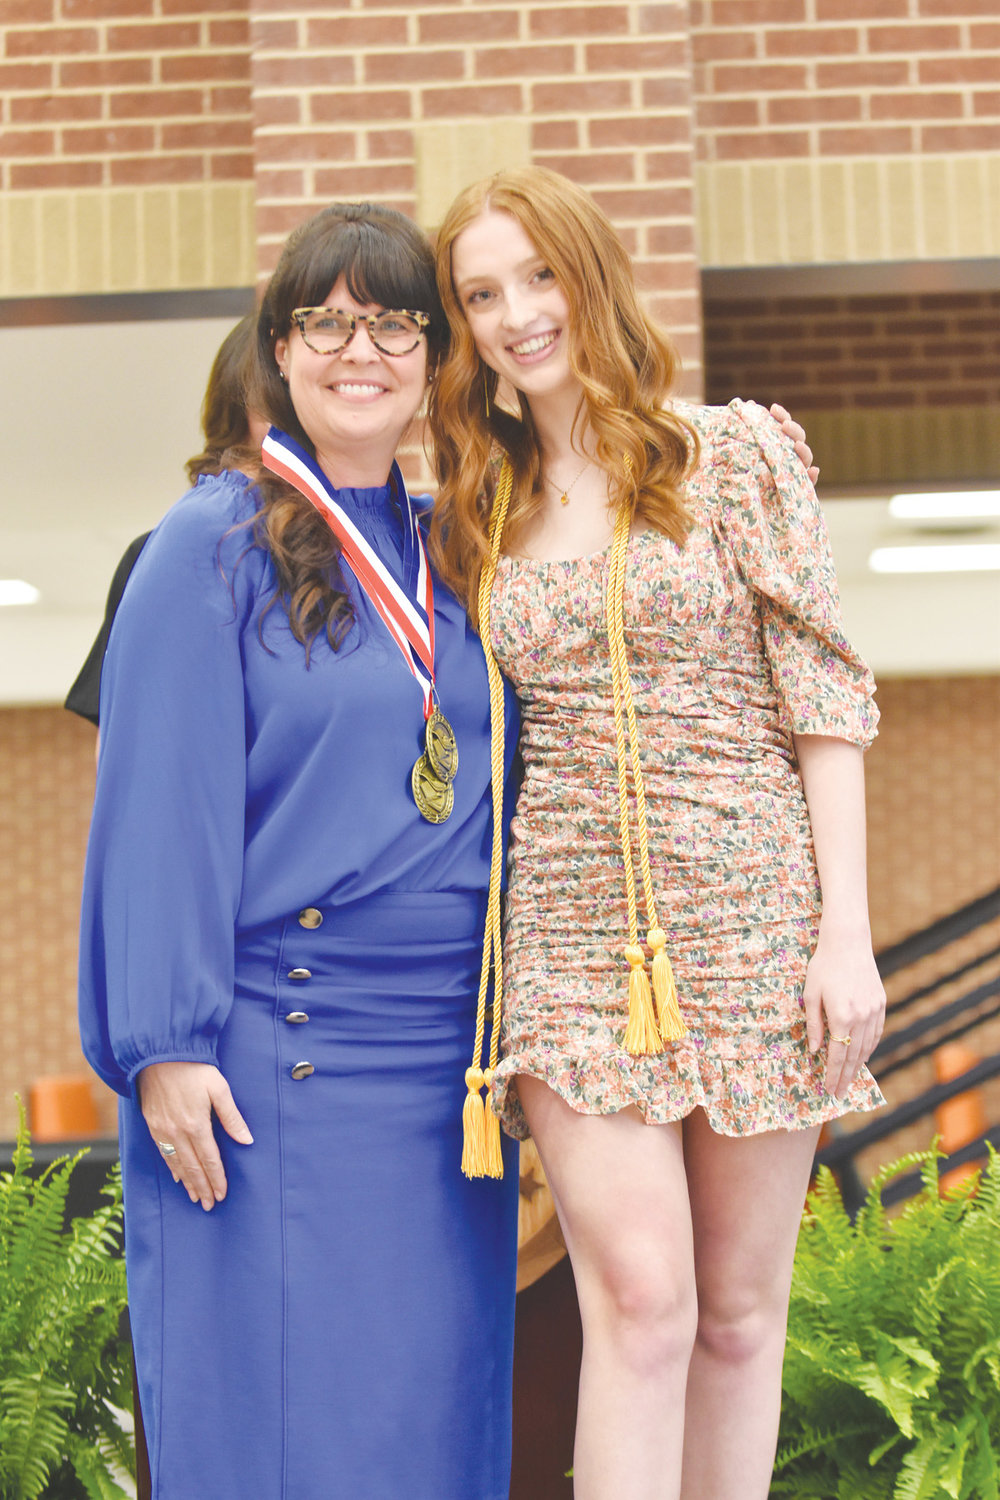 Faith Emmitte is the daughter of Kyle and Brandy Emmitte. Faith plans to attend Texas A&M University, major in business administration, and potentially enter corporate law. She honored Mrs. Emily Arnold.